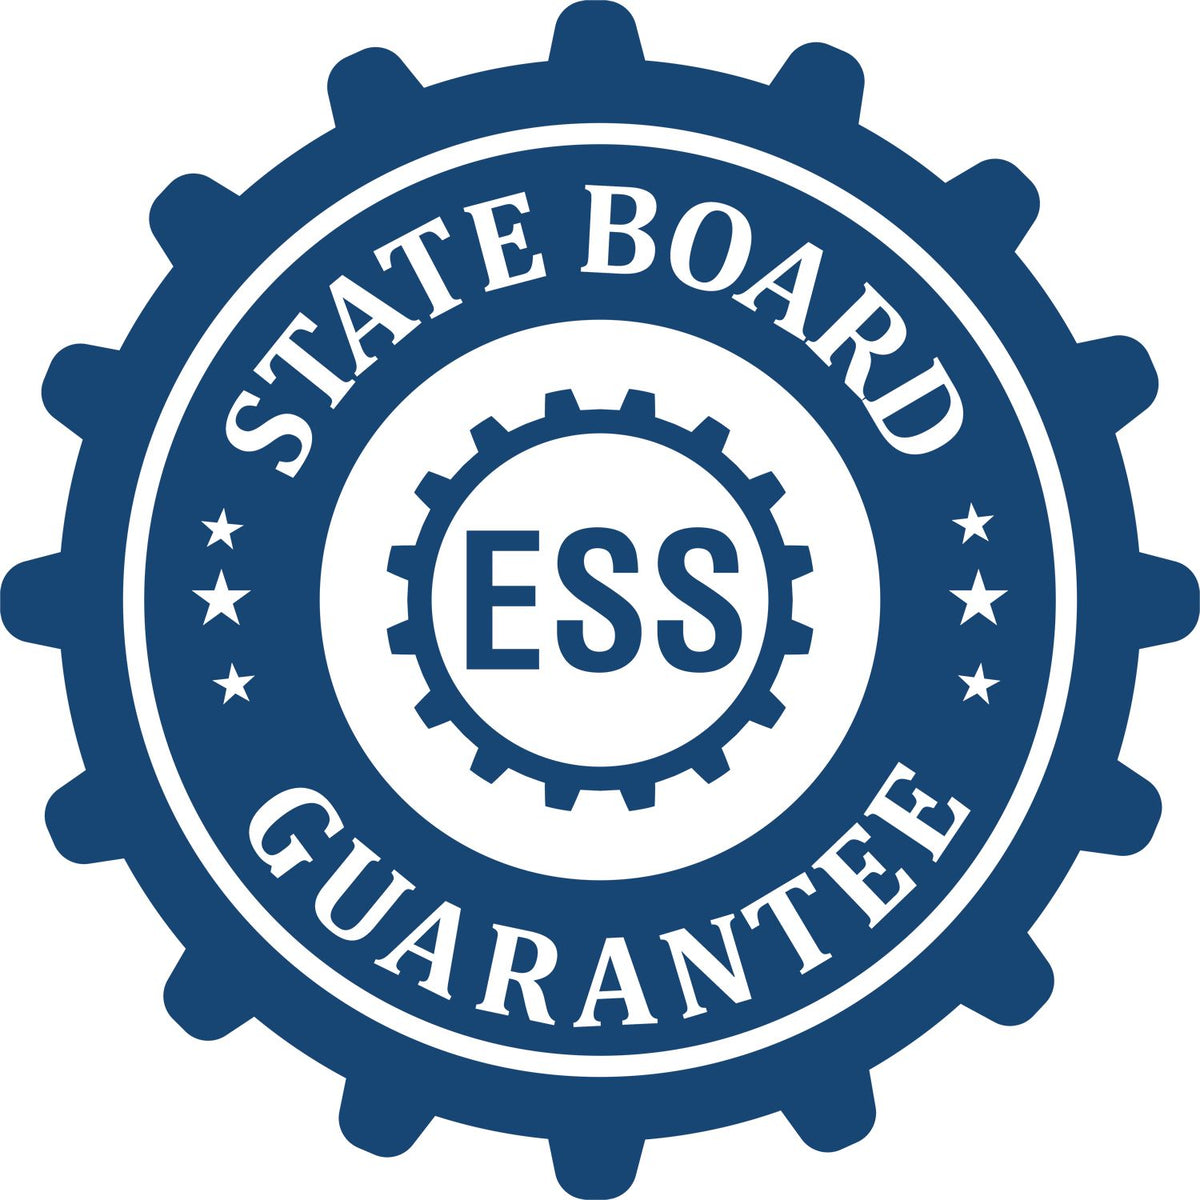 An emblem in a gear shape illustrating a state board guarantee for the Digital North Carolina Landscape Architect Stamp product.